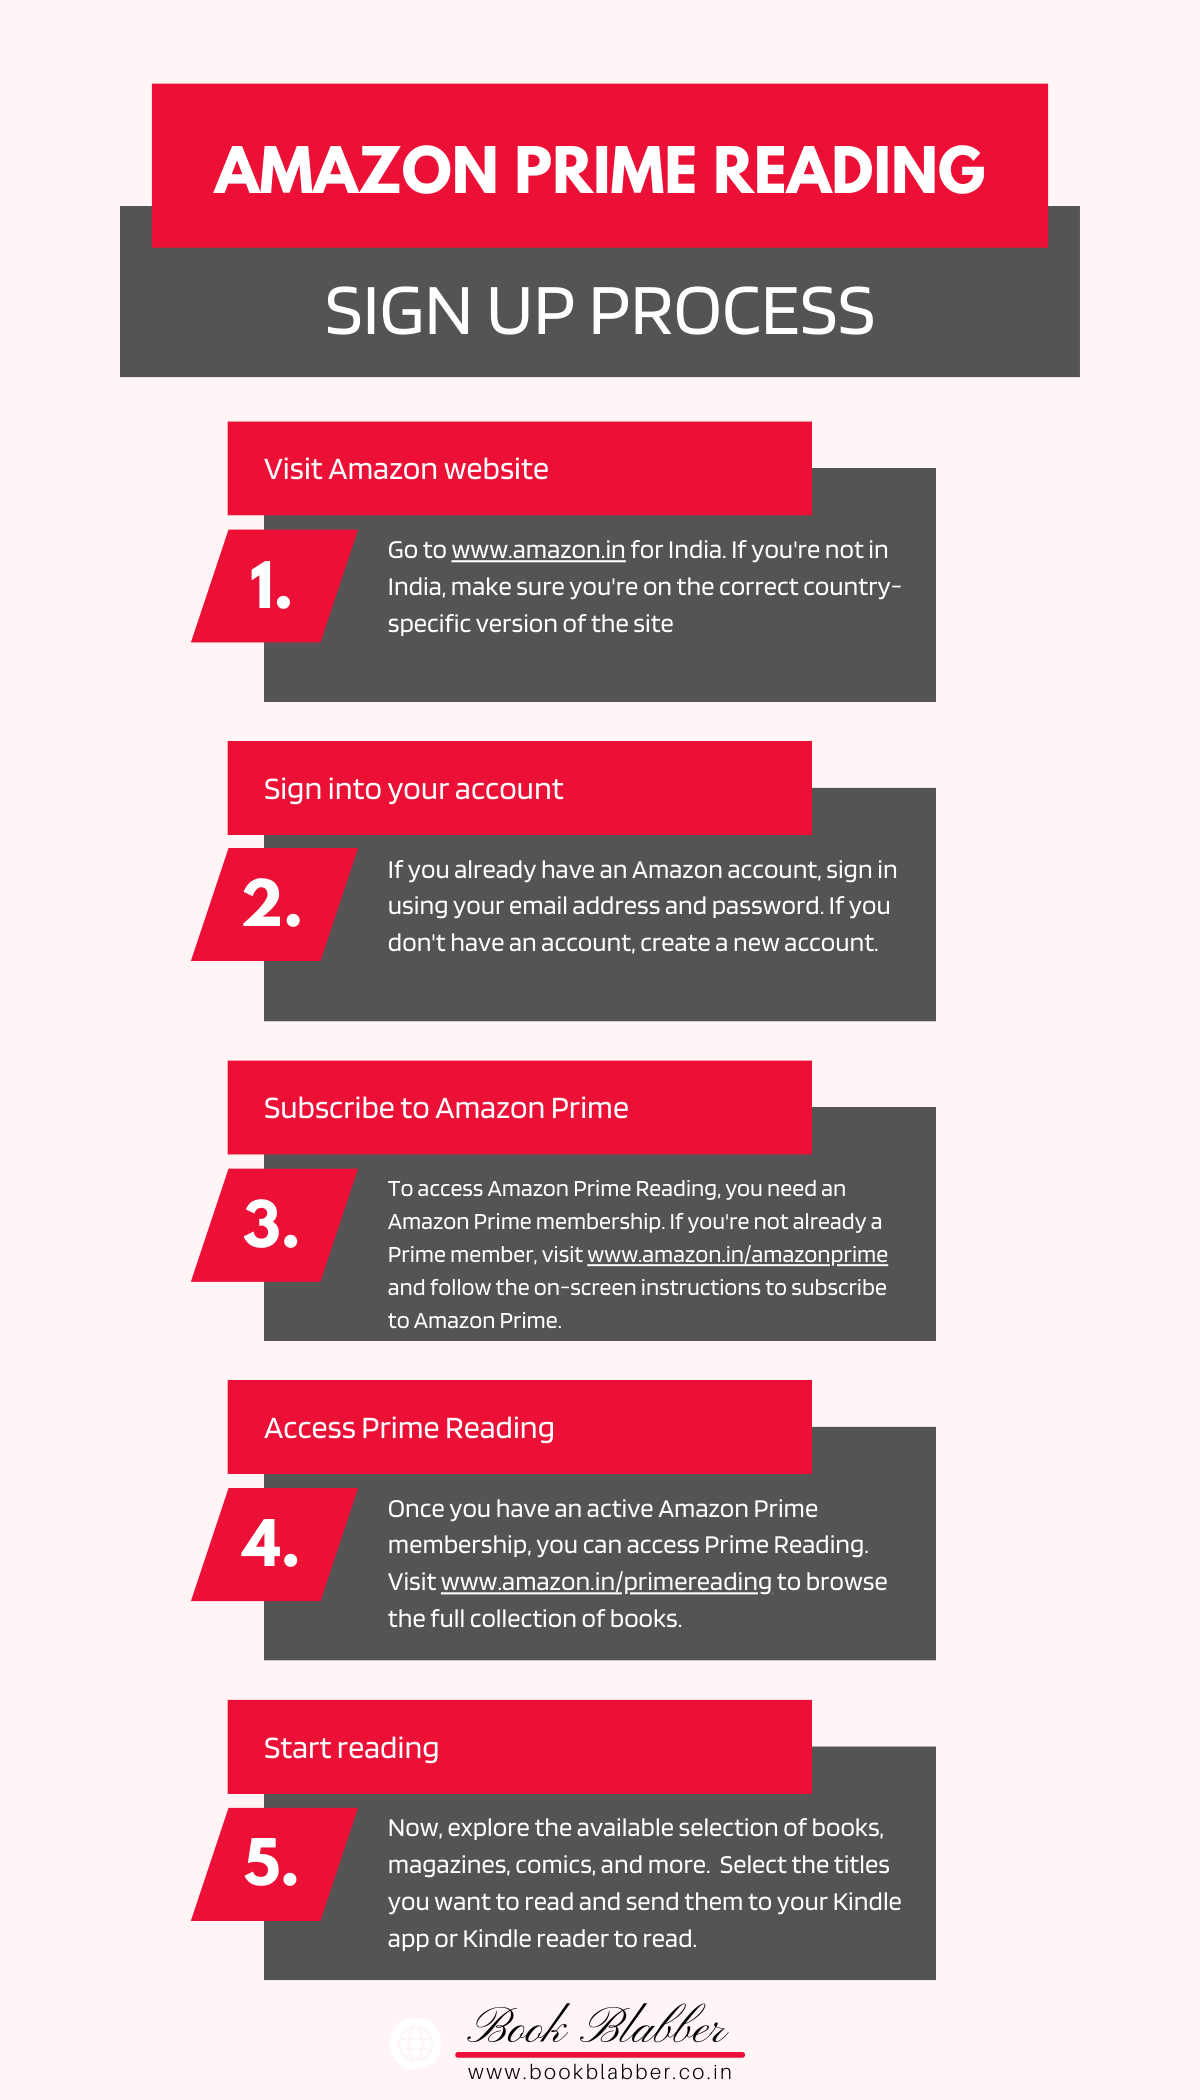 Amazon Prime Reading Sign Up Process Five Steps Infographic 